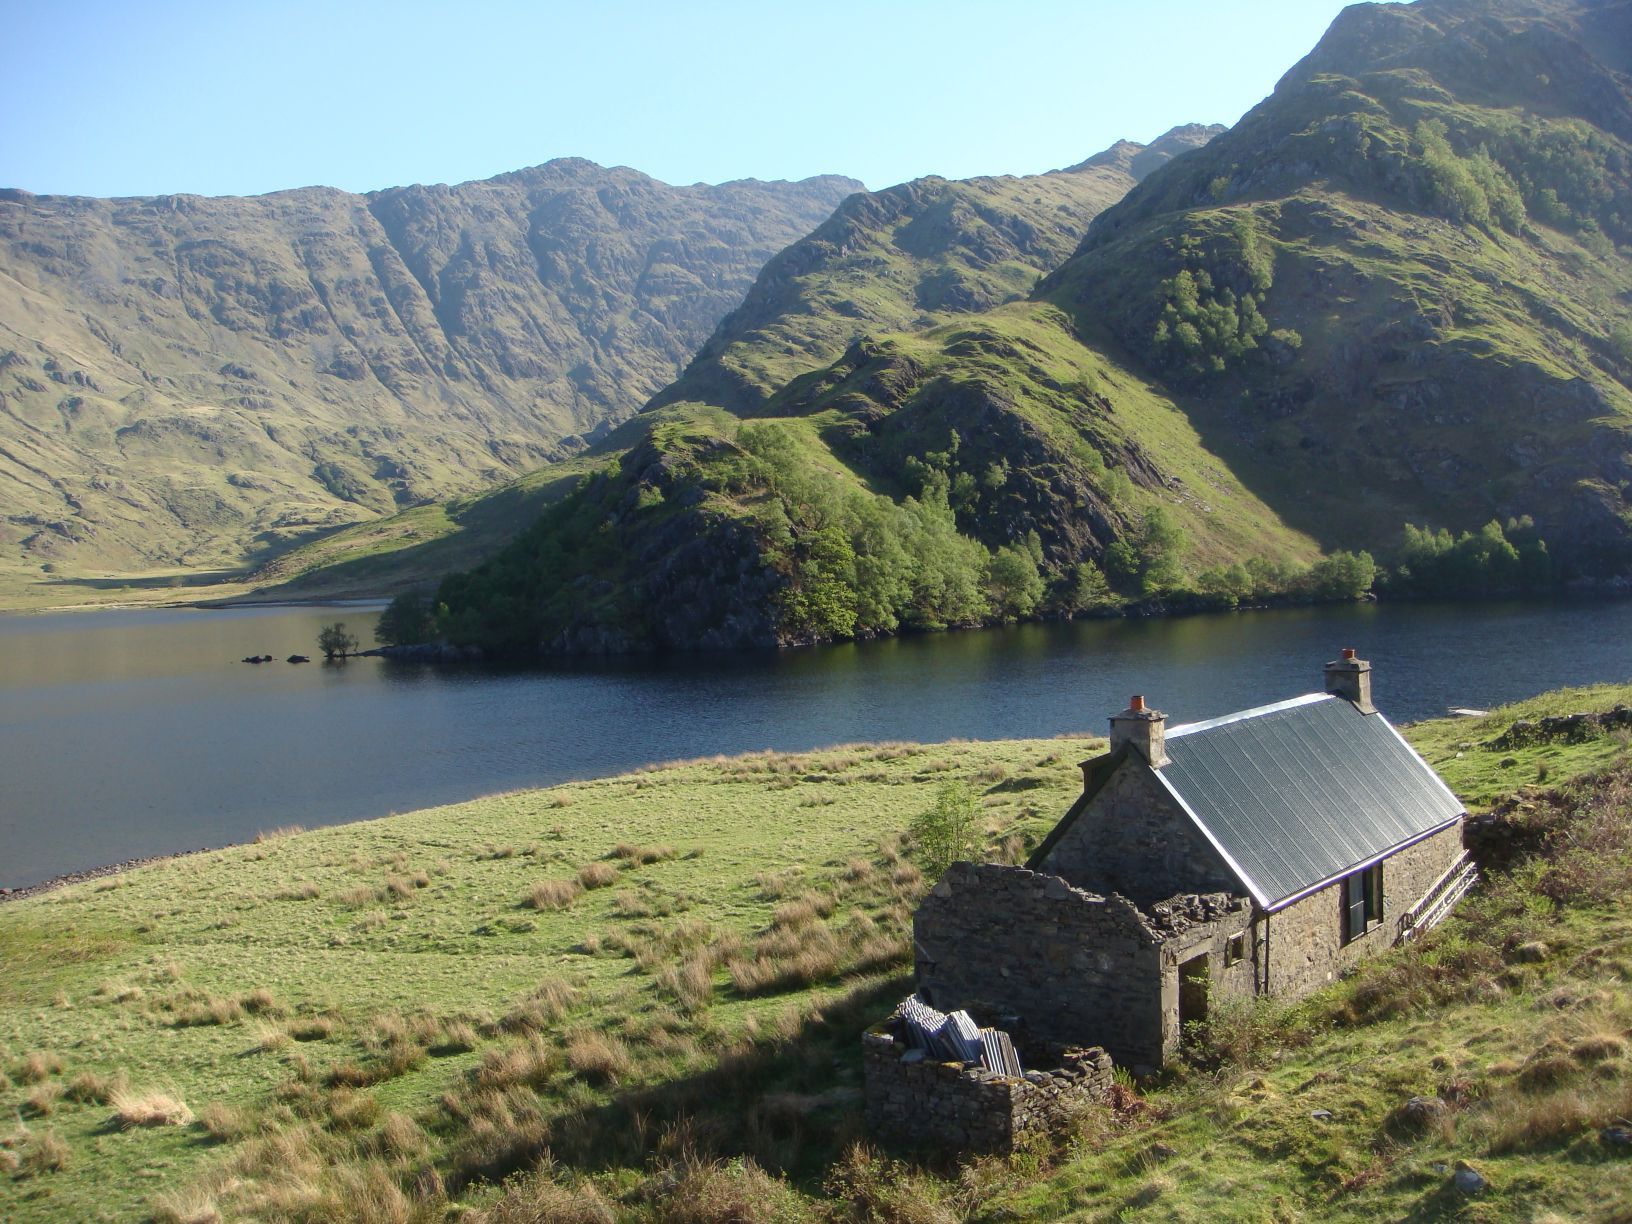 “There Really Is No Case For Keeping Them Secret” | The Place of Bothies in Scotland